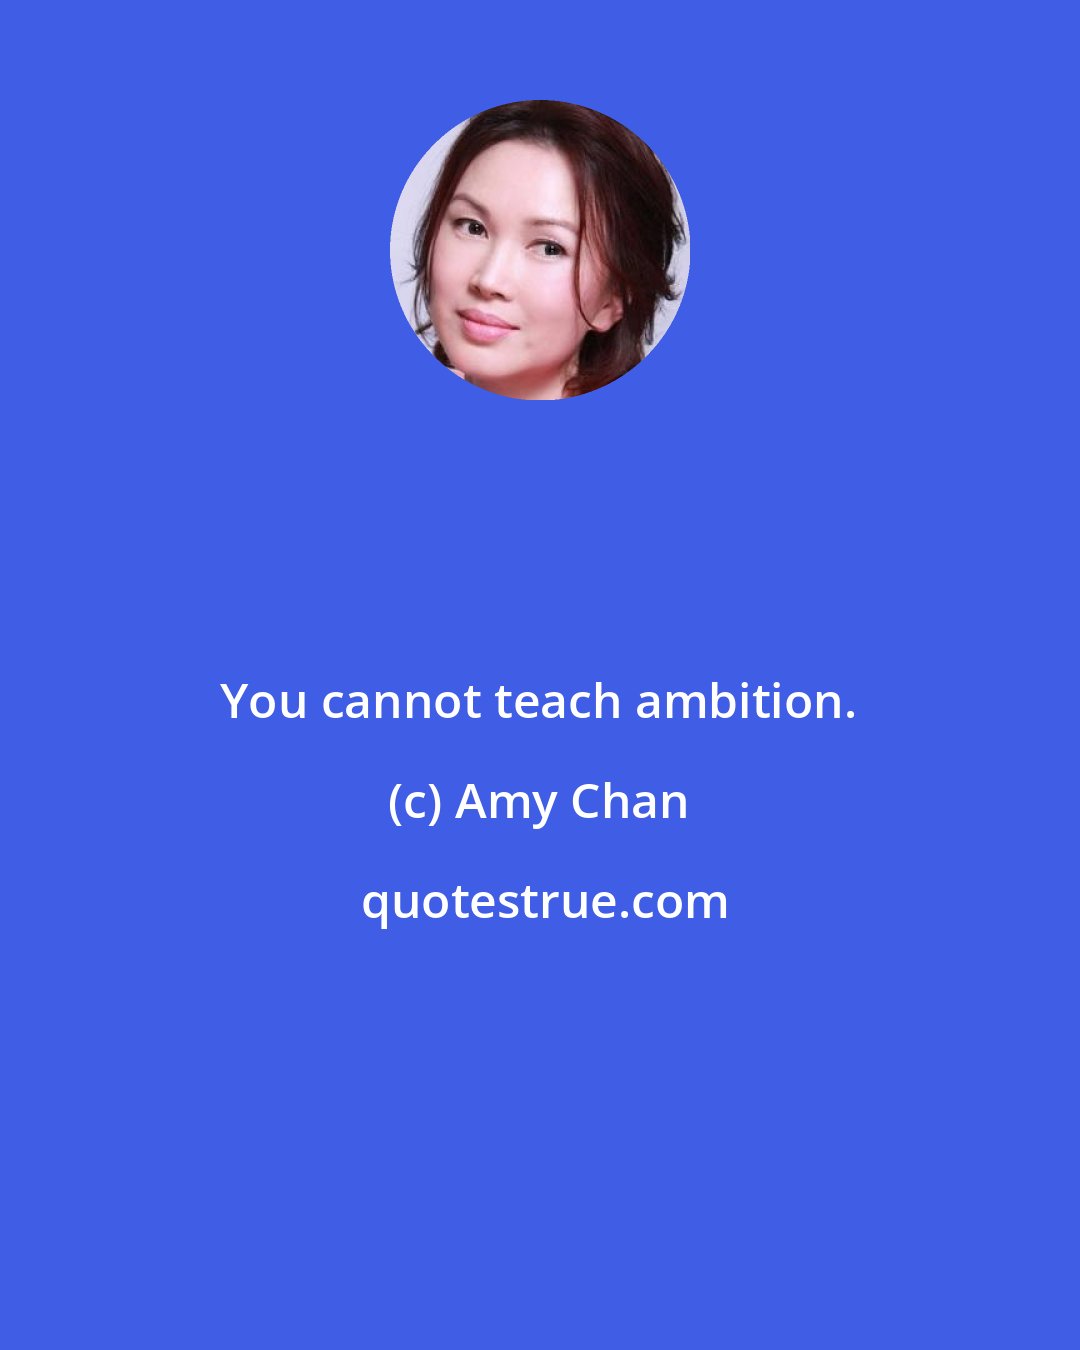 Amy Chan: You cannot teach ambition.